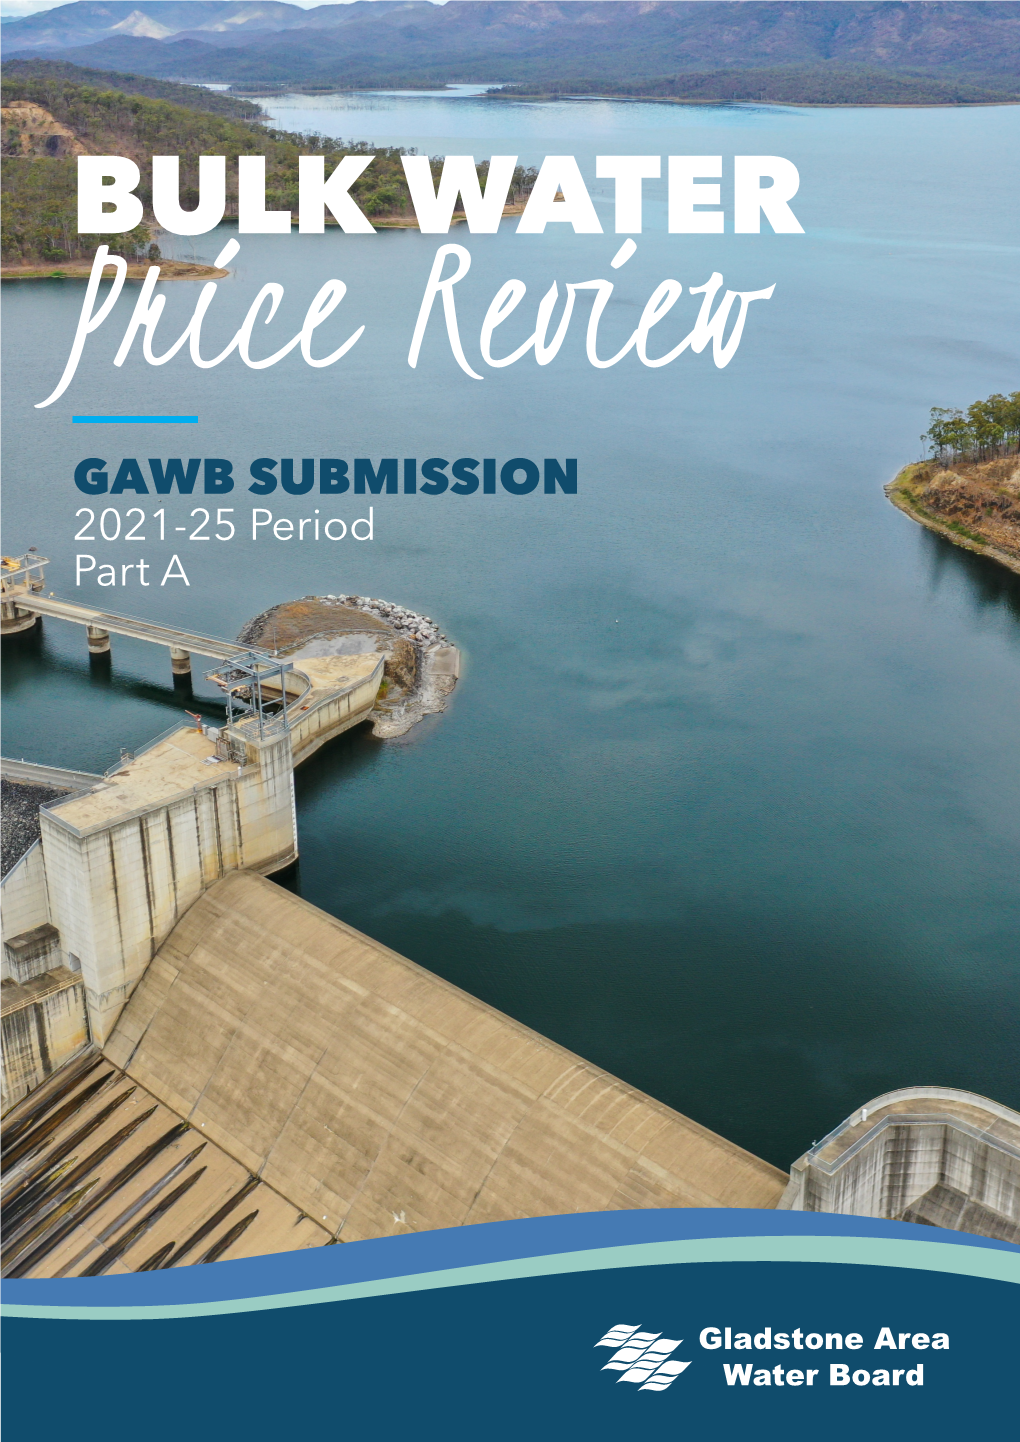 BULK WATER Price Review GAWB SUBMISSION 2021-25 Period Part A